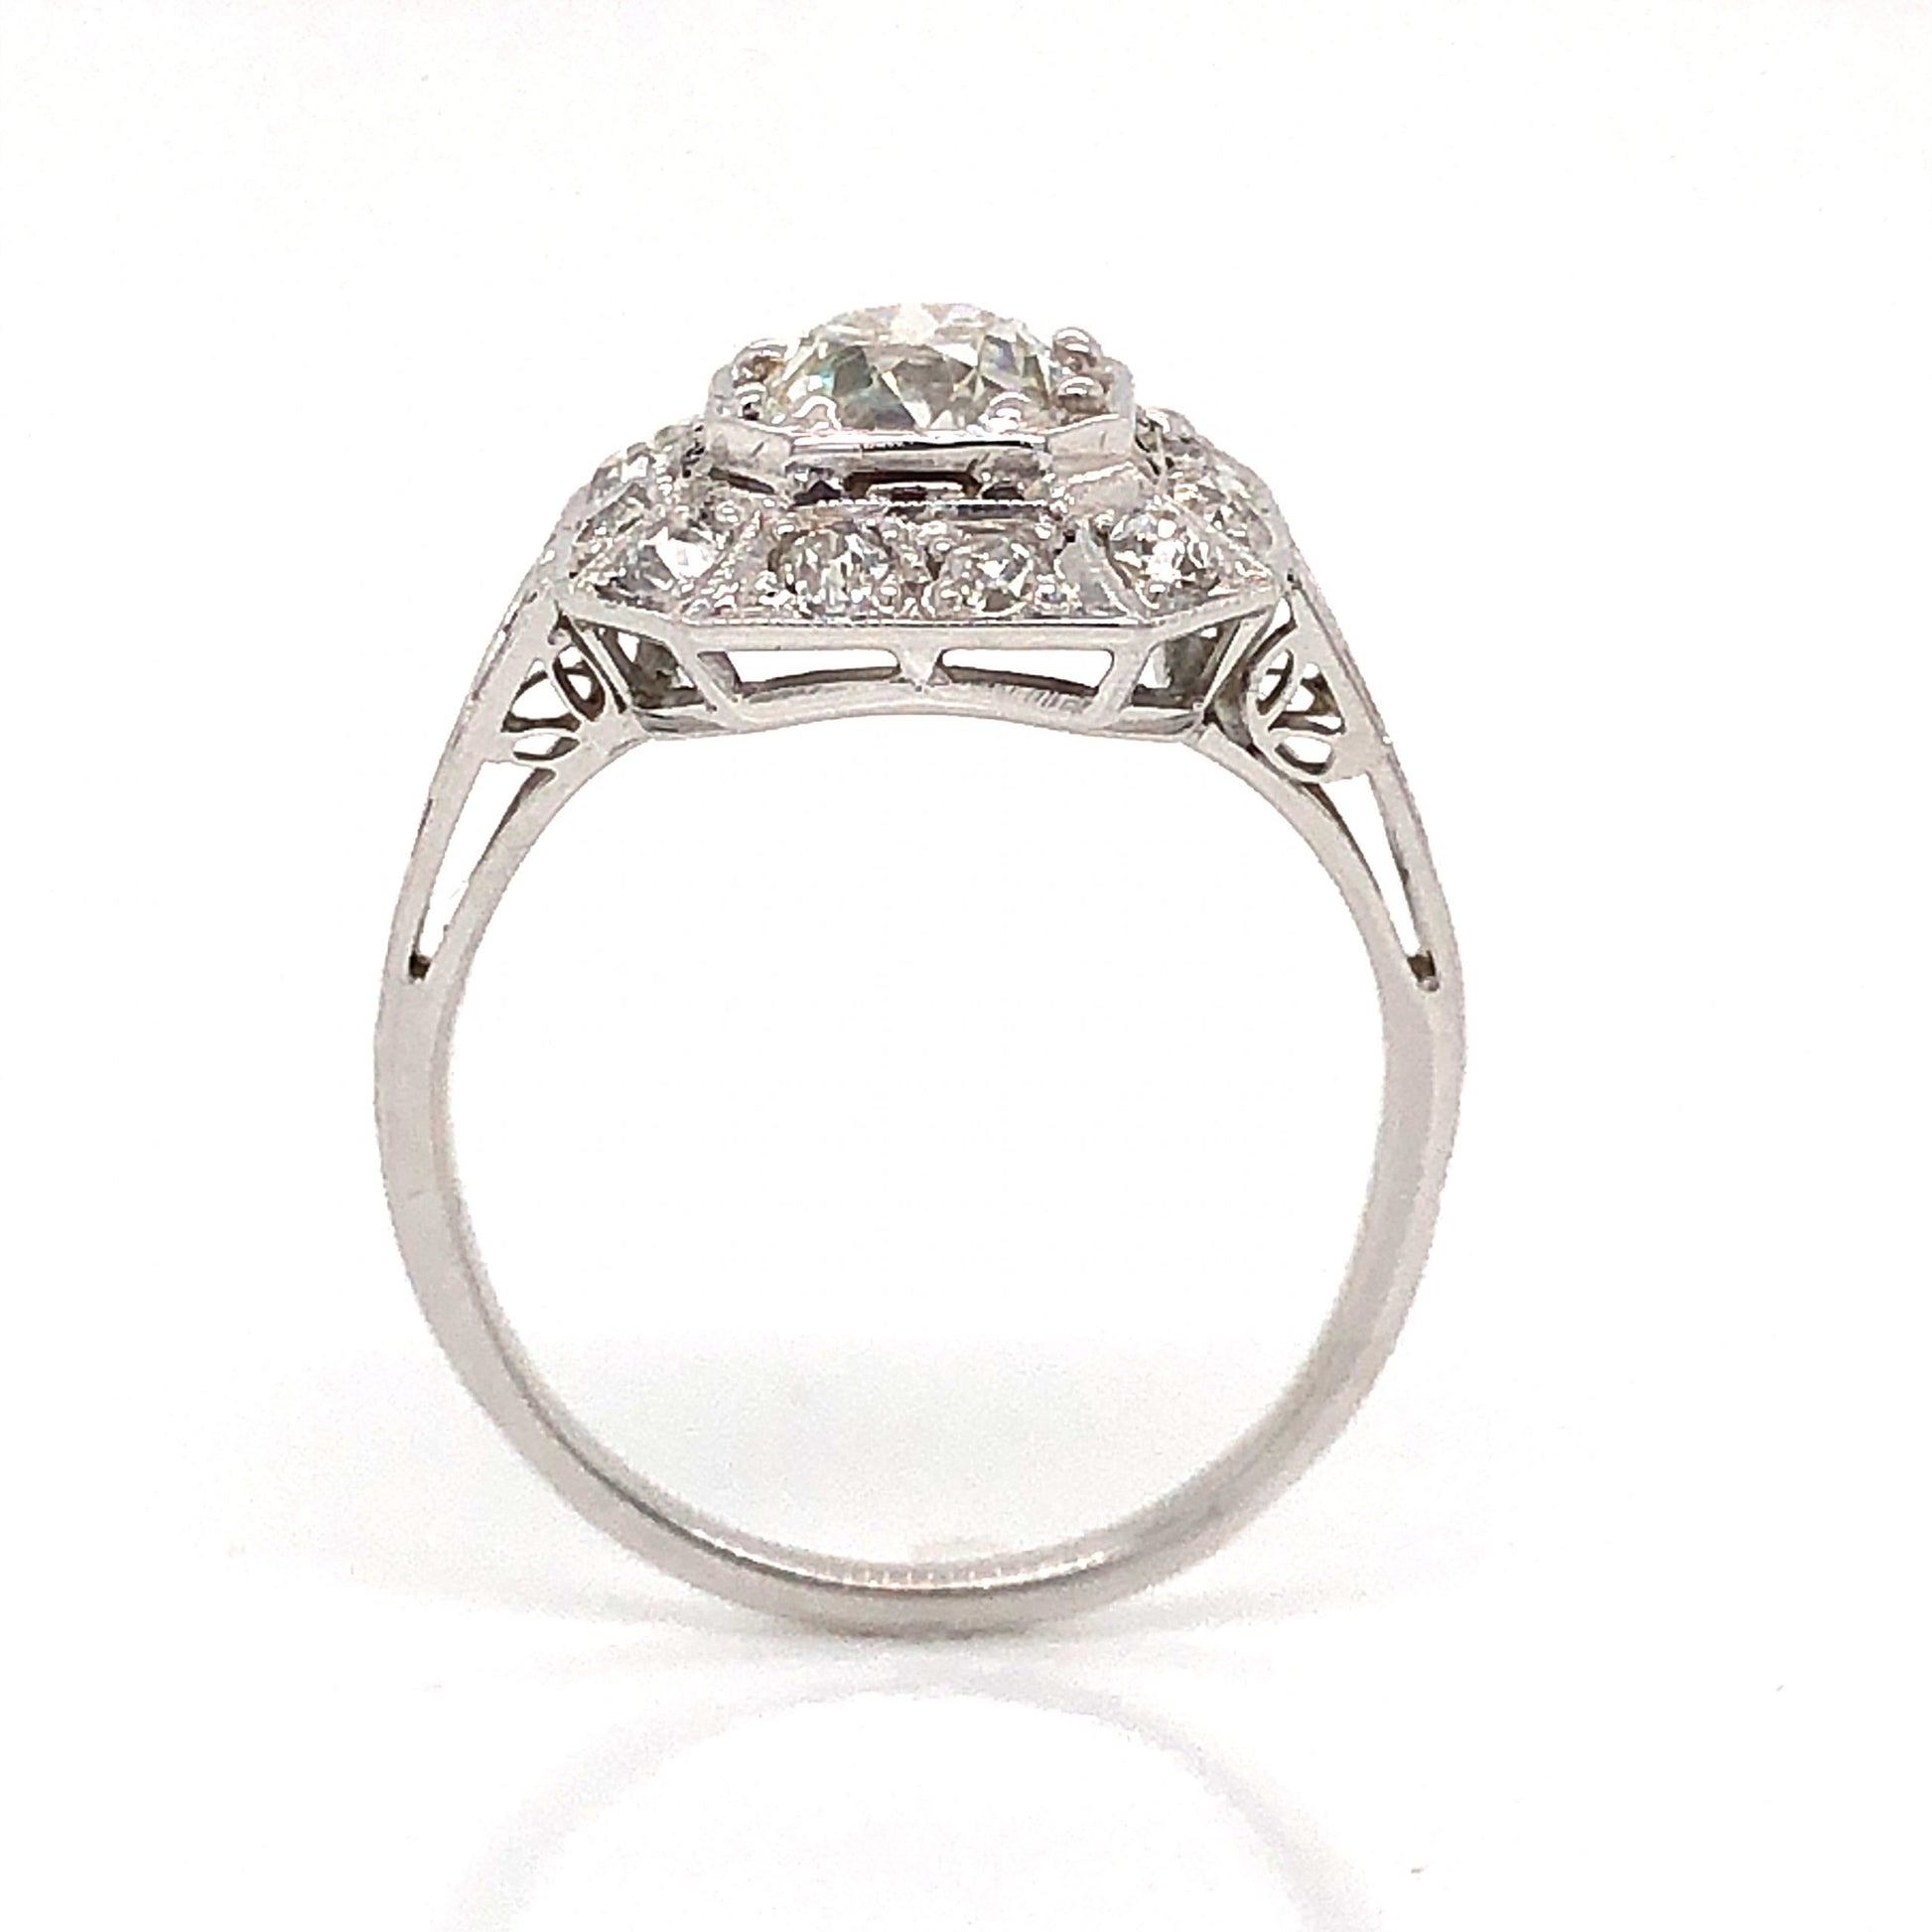 1.00 Carat Art Deco Diamond Engagement Ring in 18k White GoldComposition: Platinum Ring Size: 6 Total Diamond Weight: 1.36ct Total Gram Weight: 3.1 g